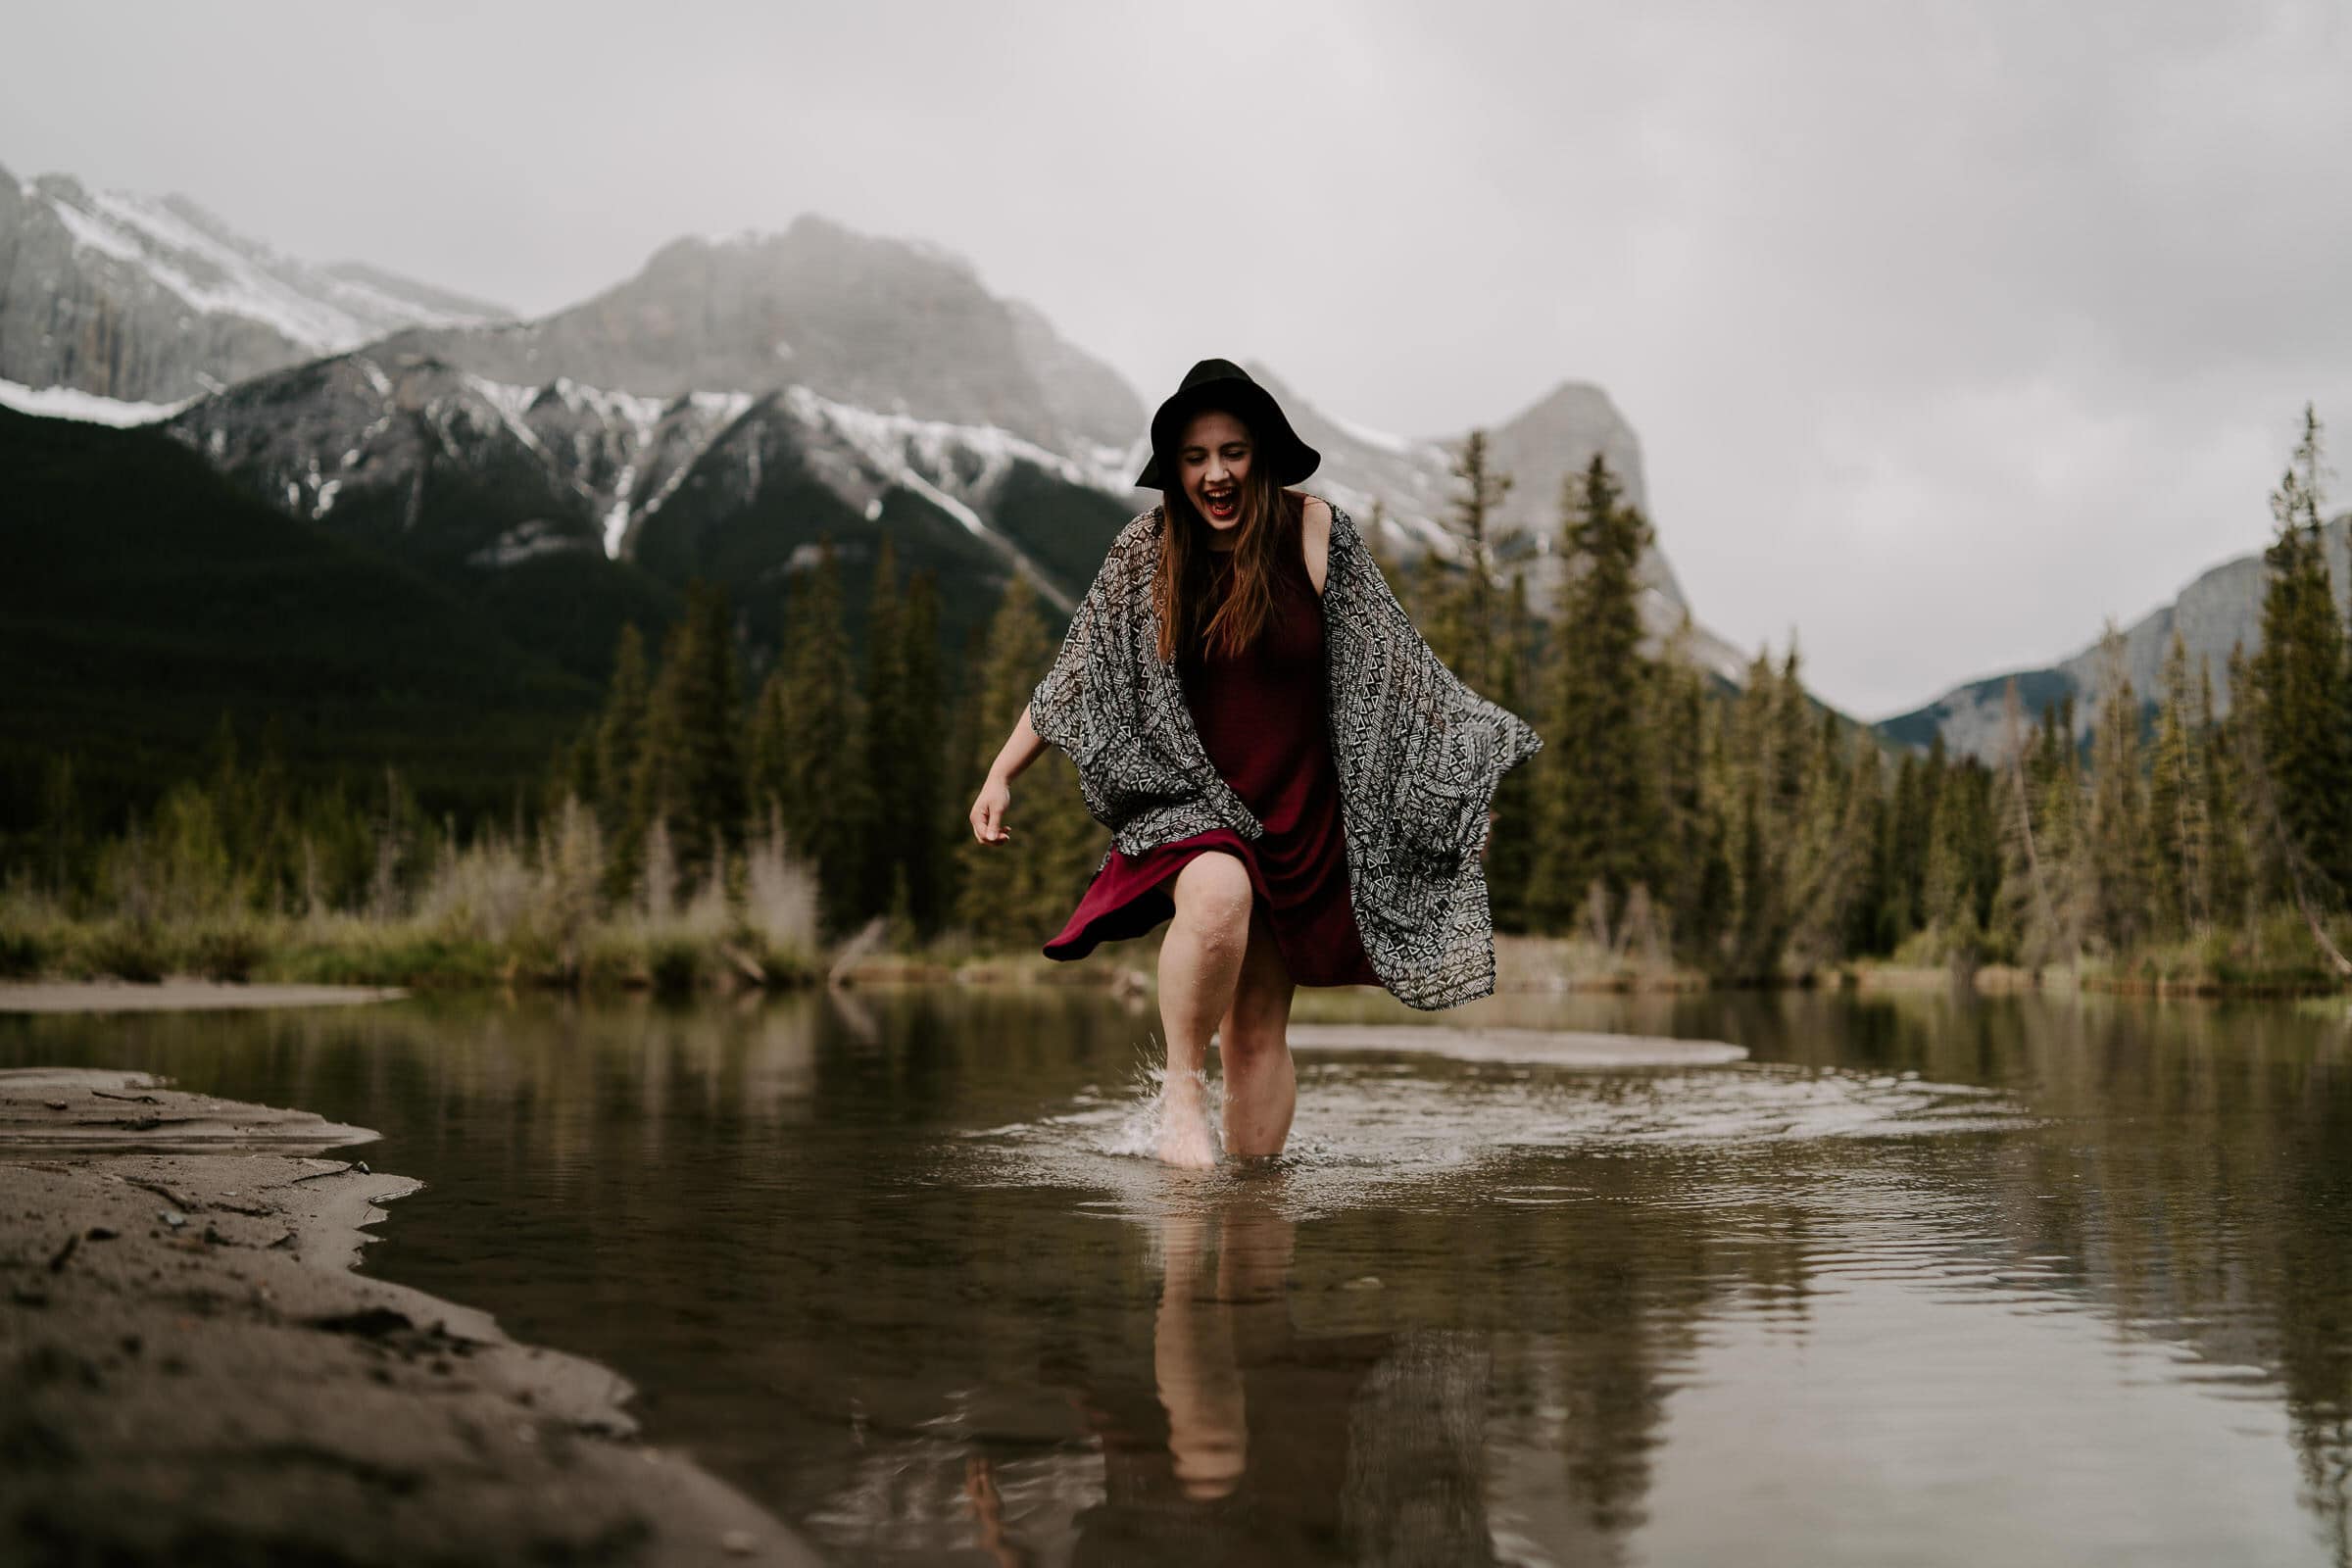 A woman photographer walking through water in front of mountains.